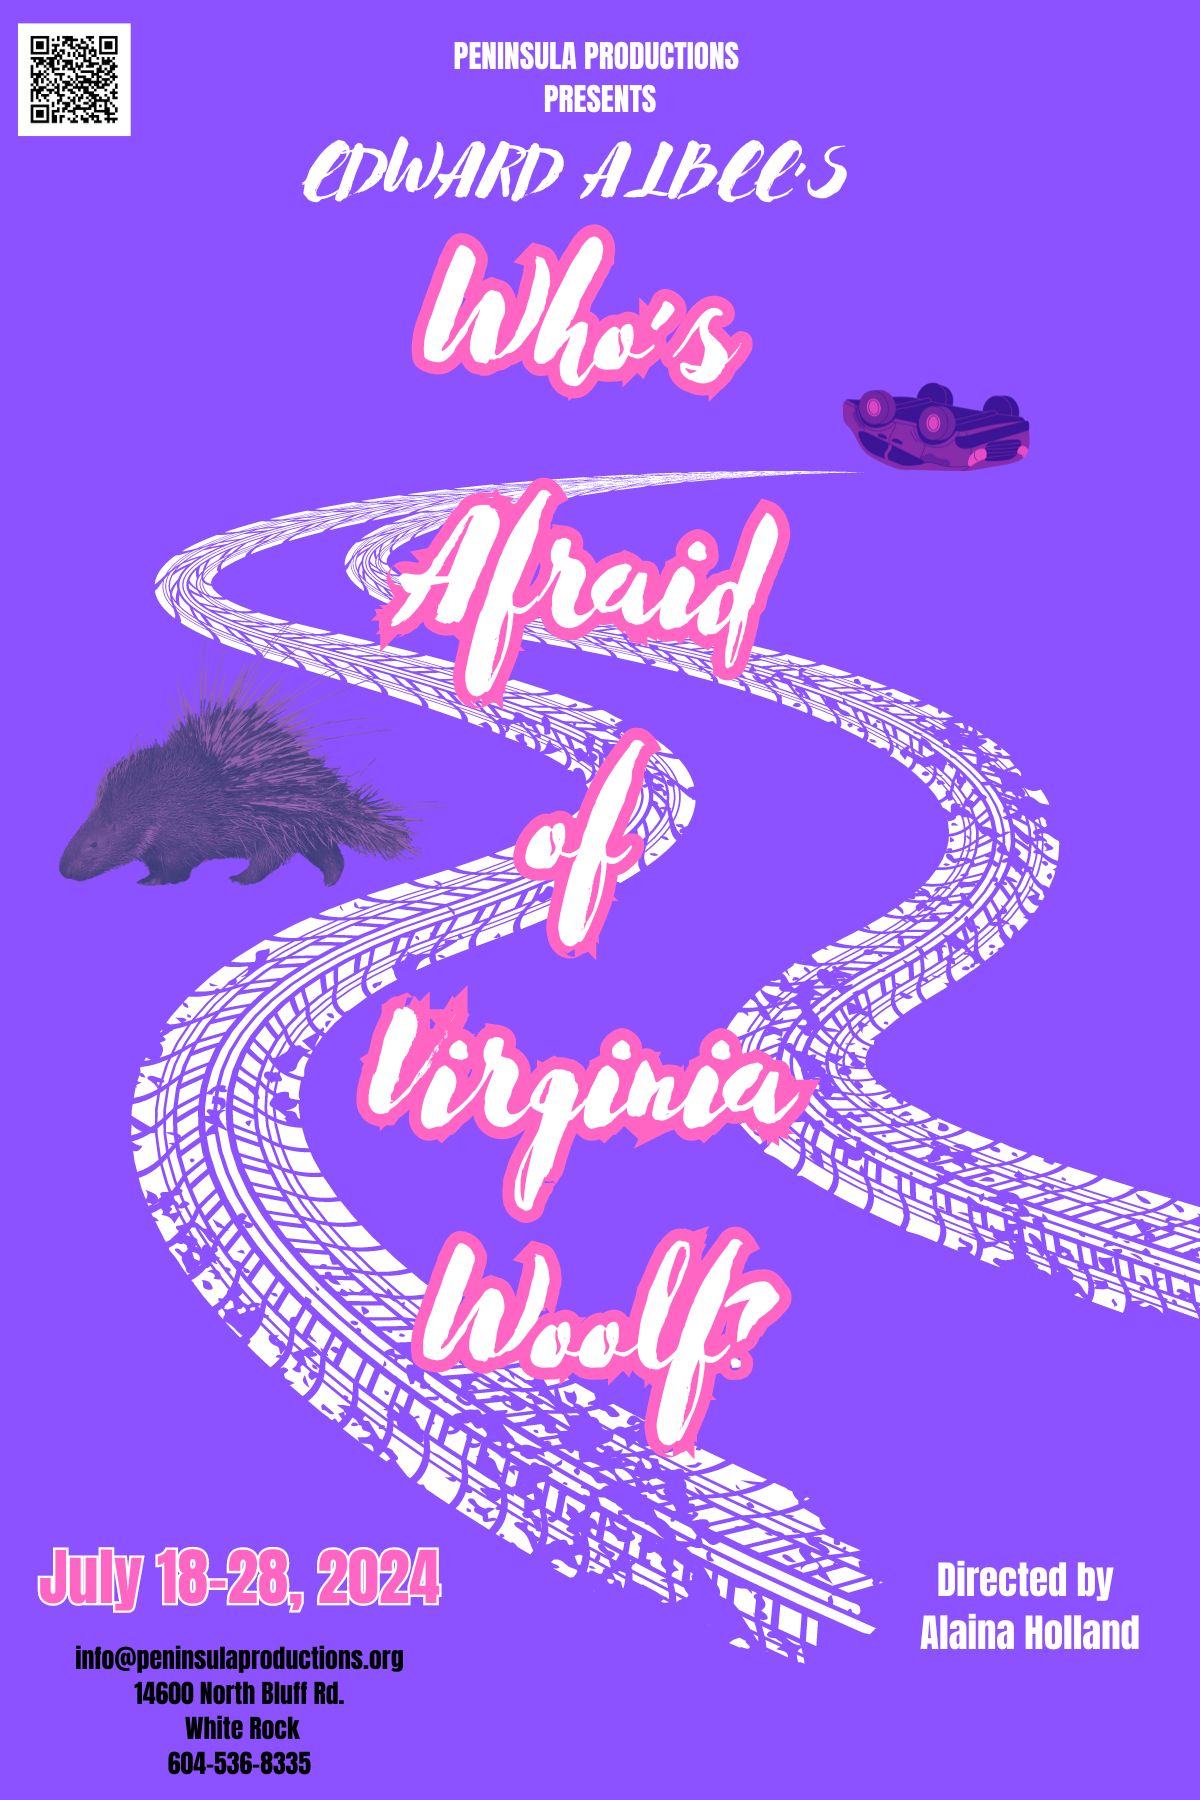 Who's Afraid of Virginia Woolf poster<br />
